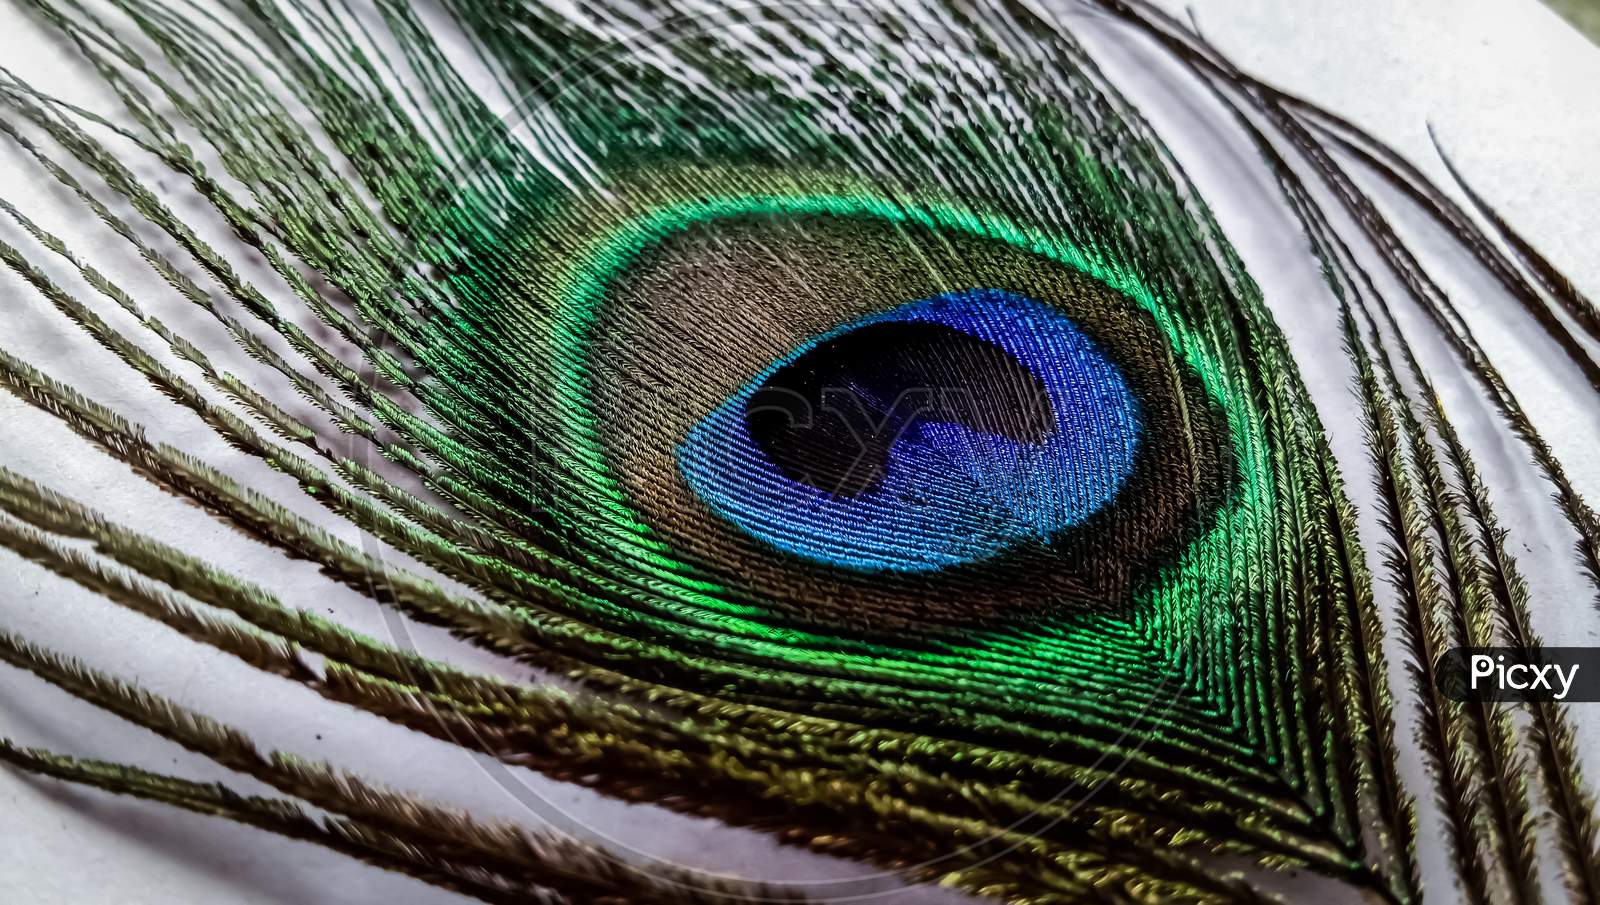 A awesome peacock feather.